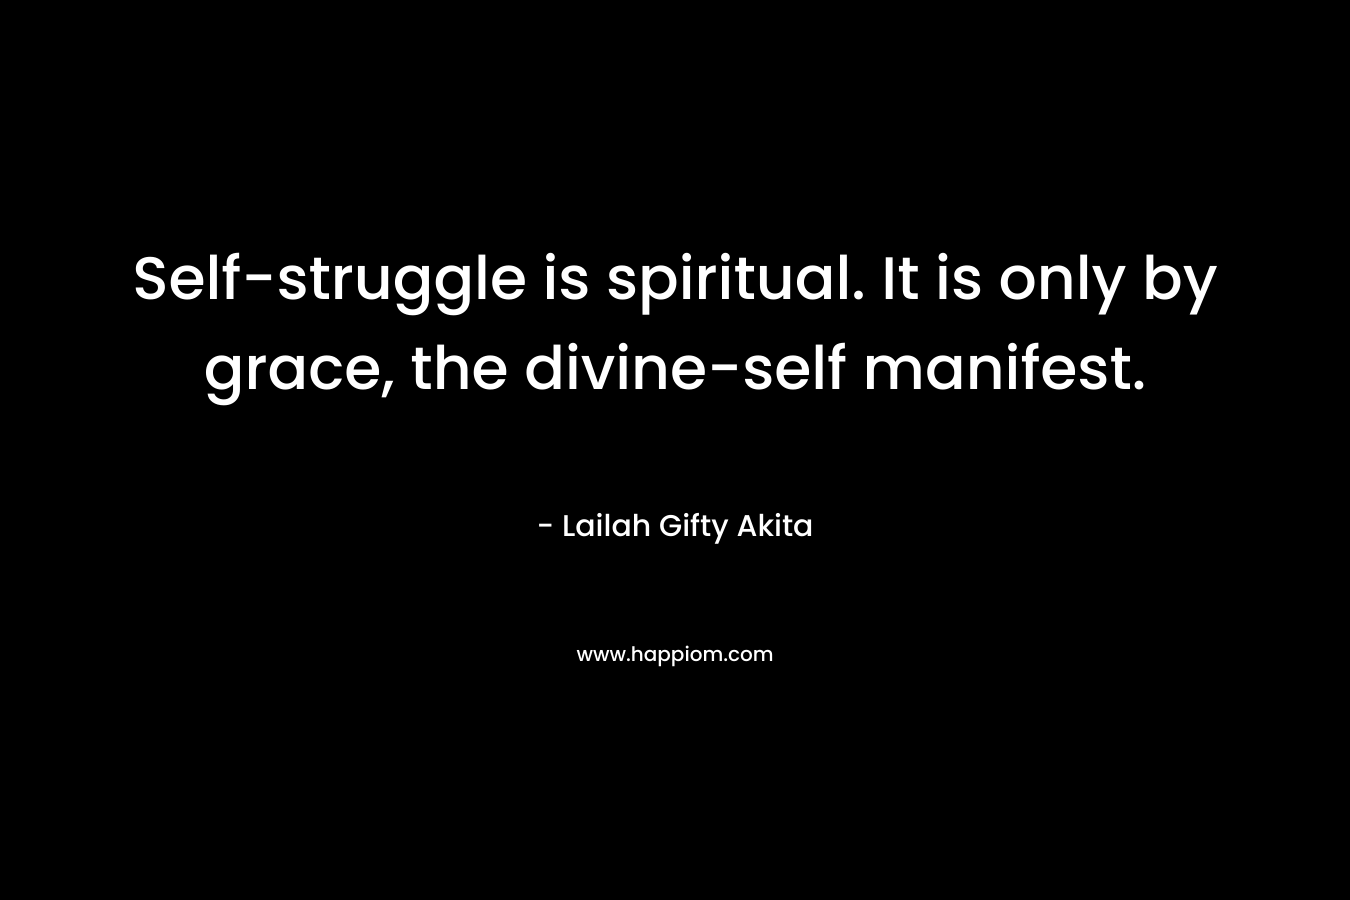 Self-struggle is spiritual. It is only by grace, the divine-self manifest.